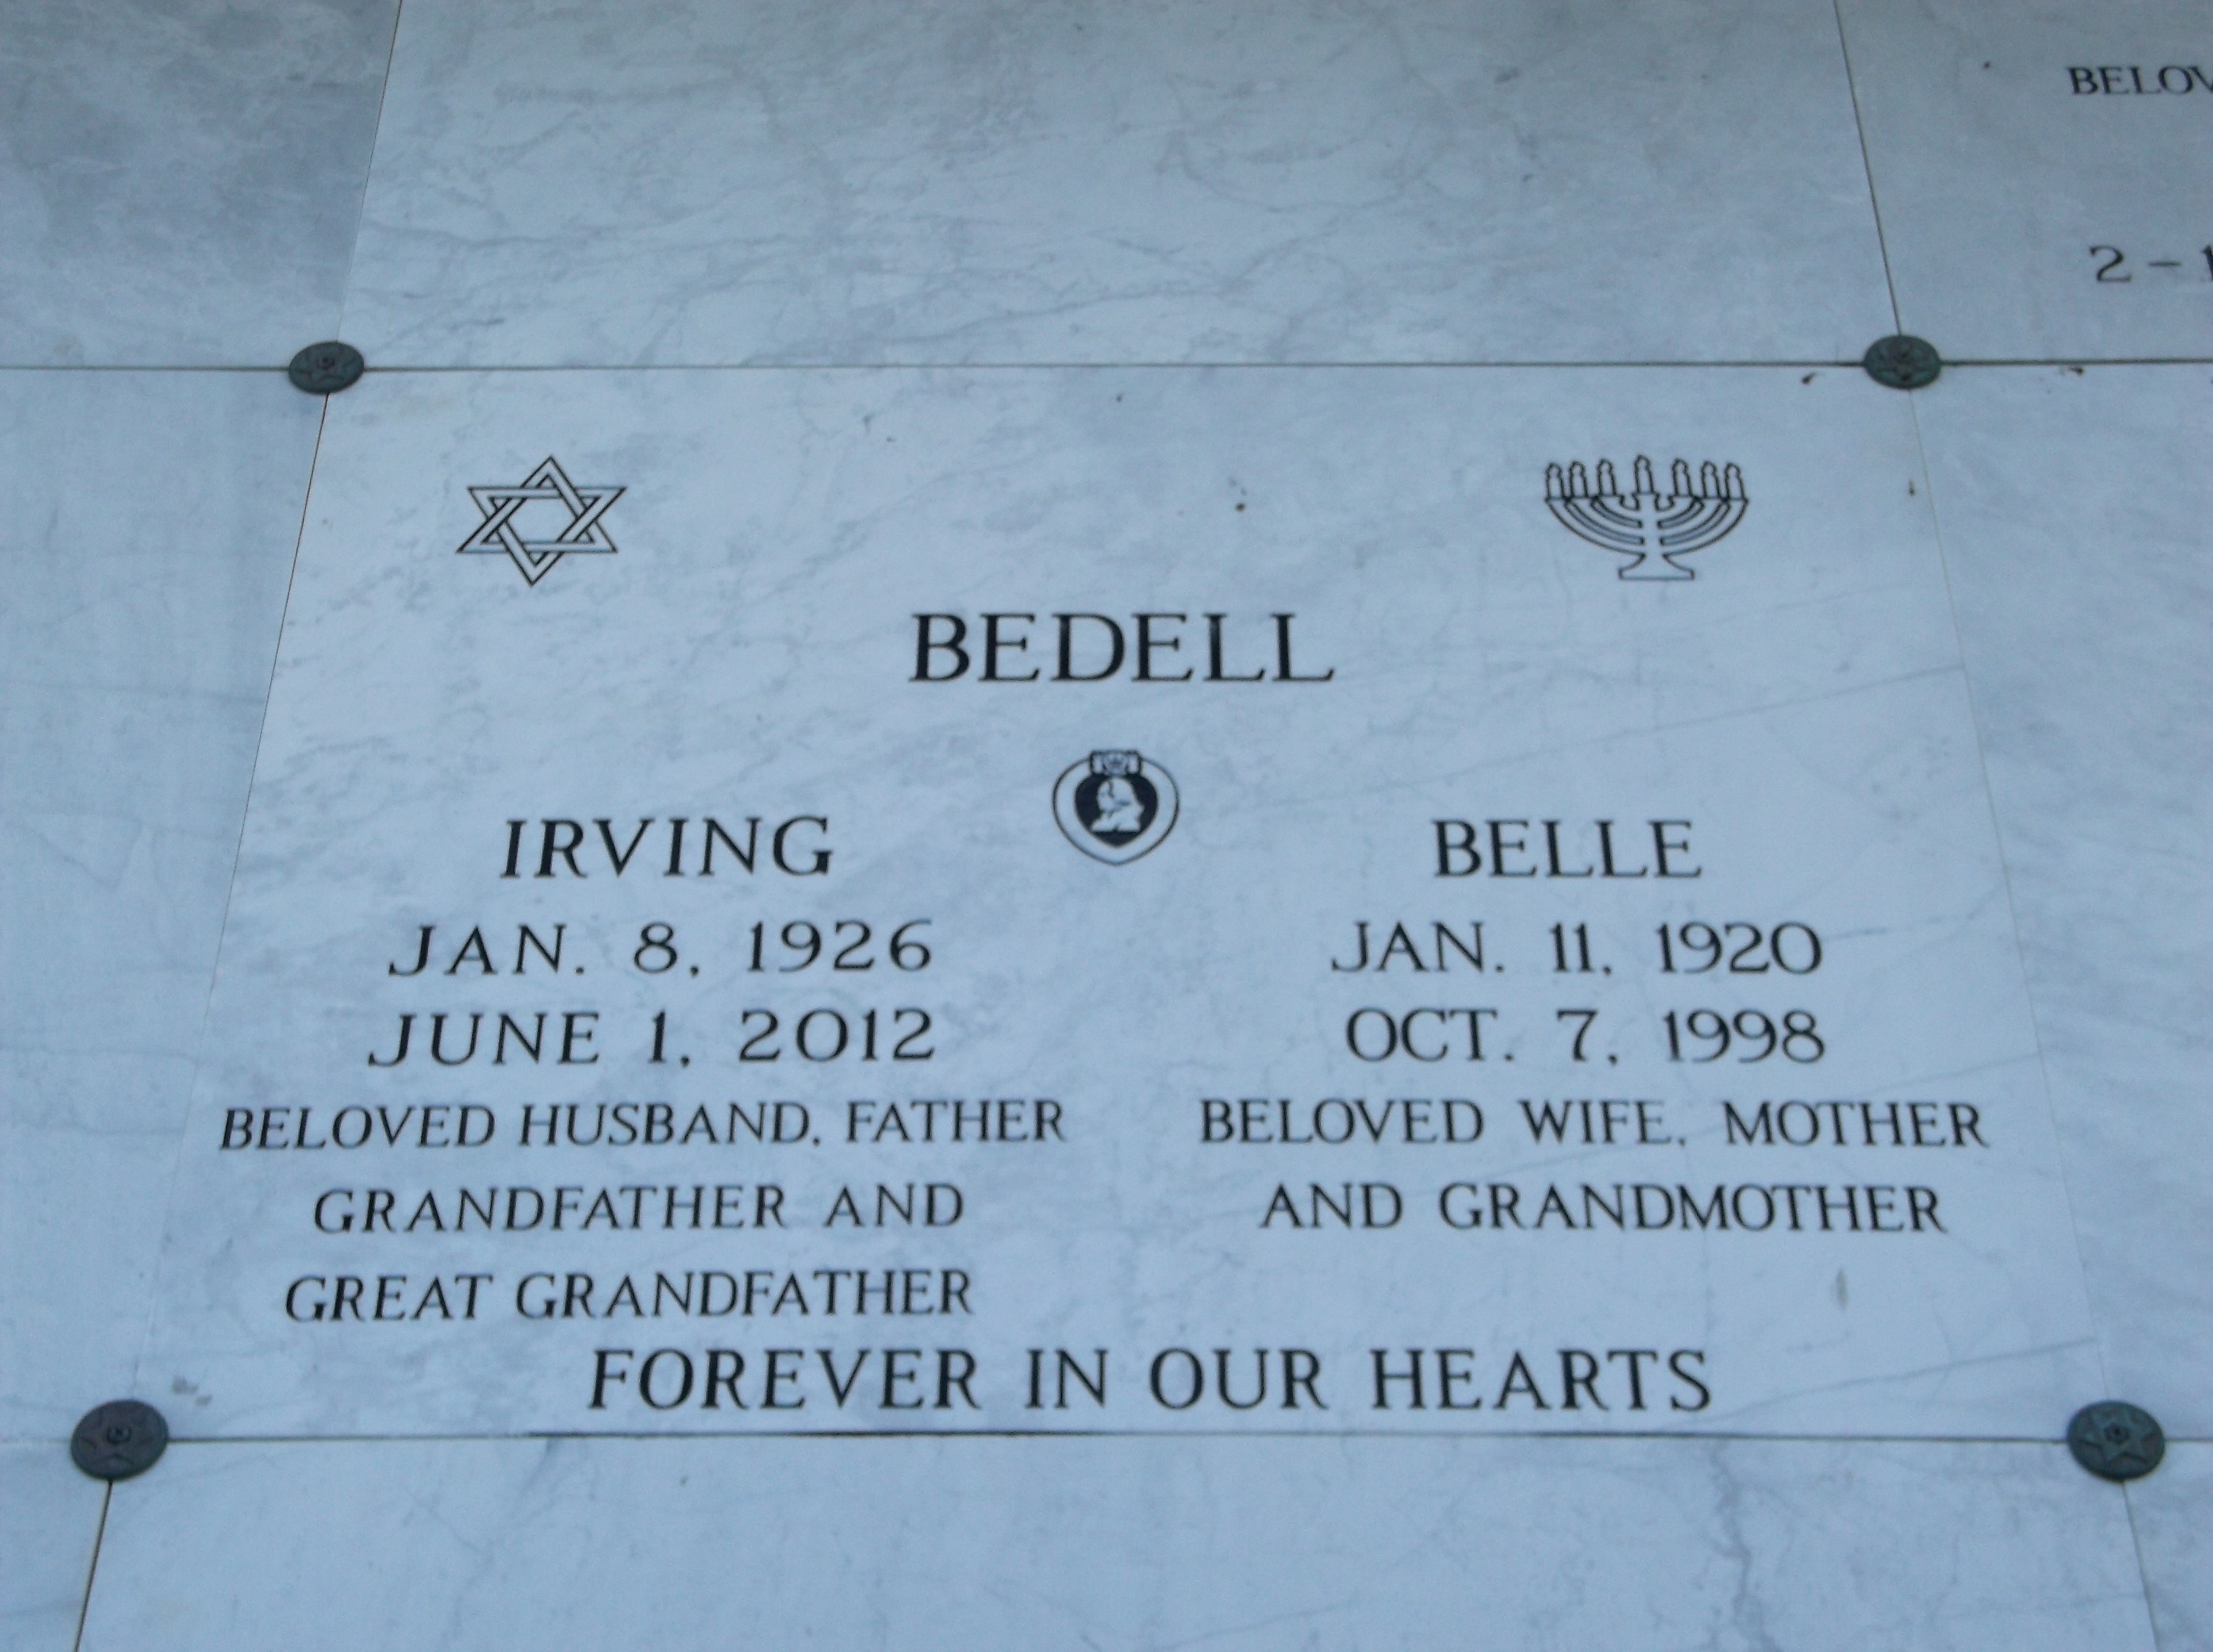 Irving Bedell